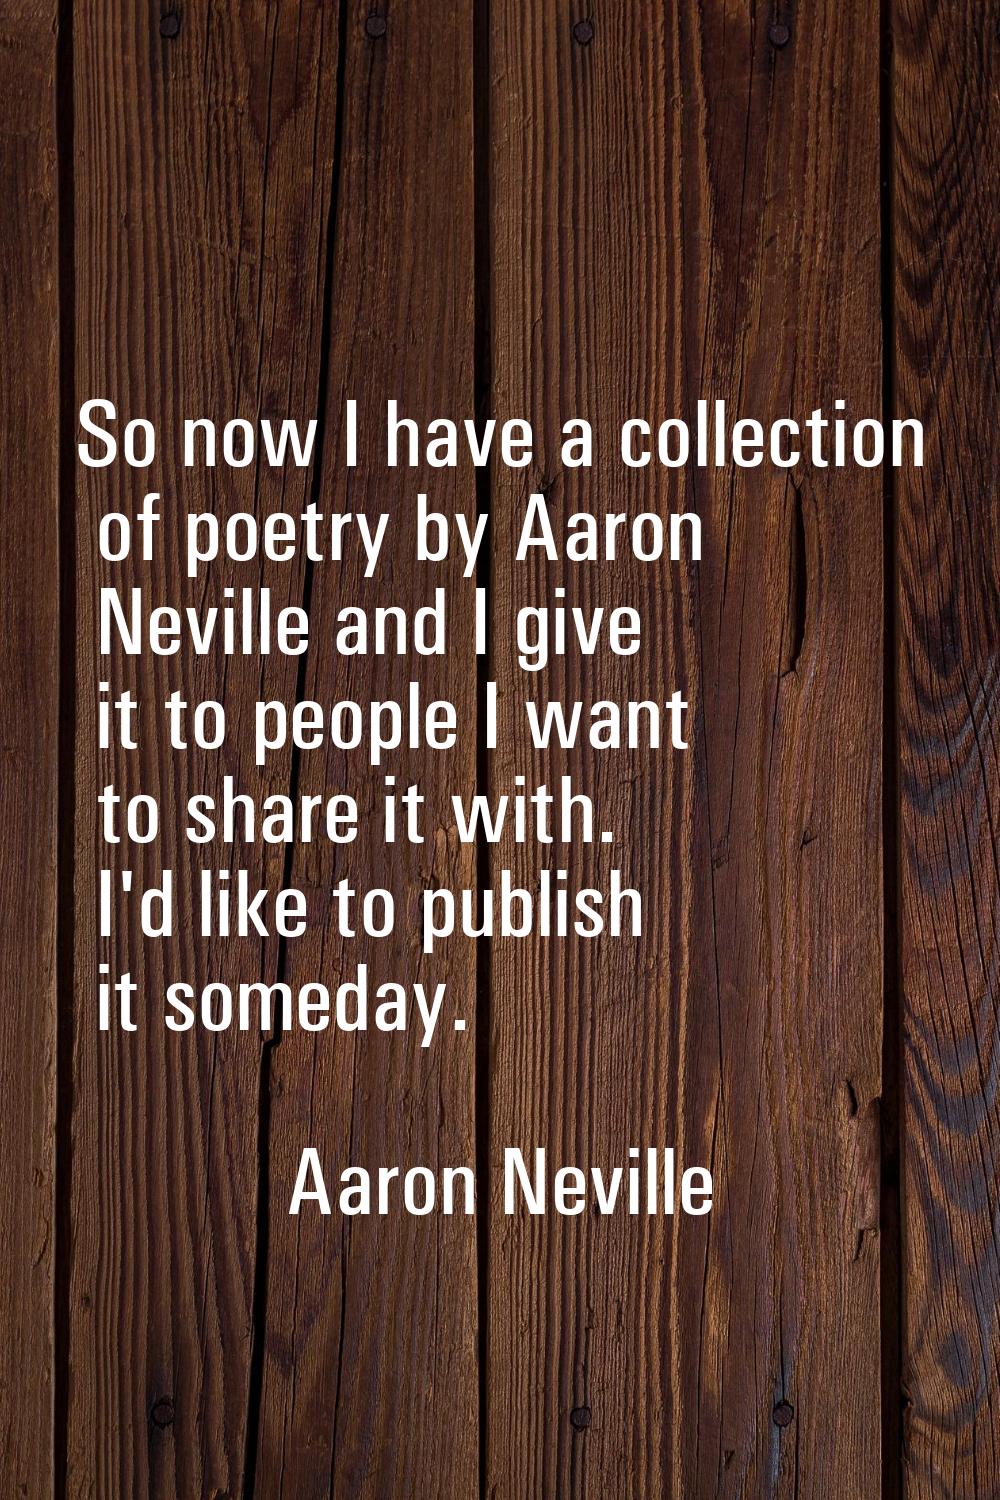 So now I have a collection of poetry by Aaron Neville and I give it to people I want to share it wi